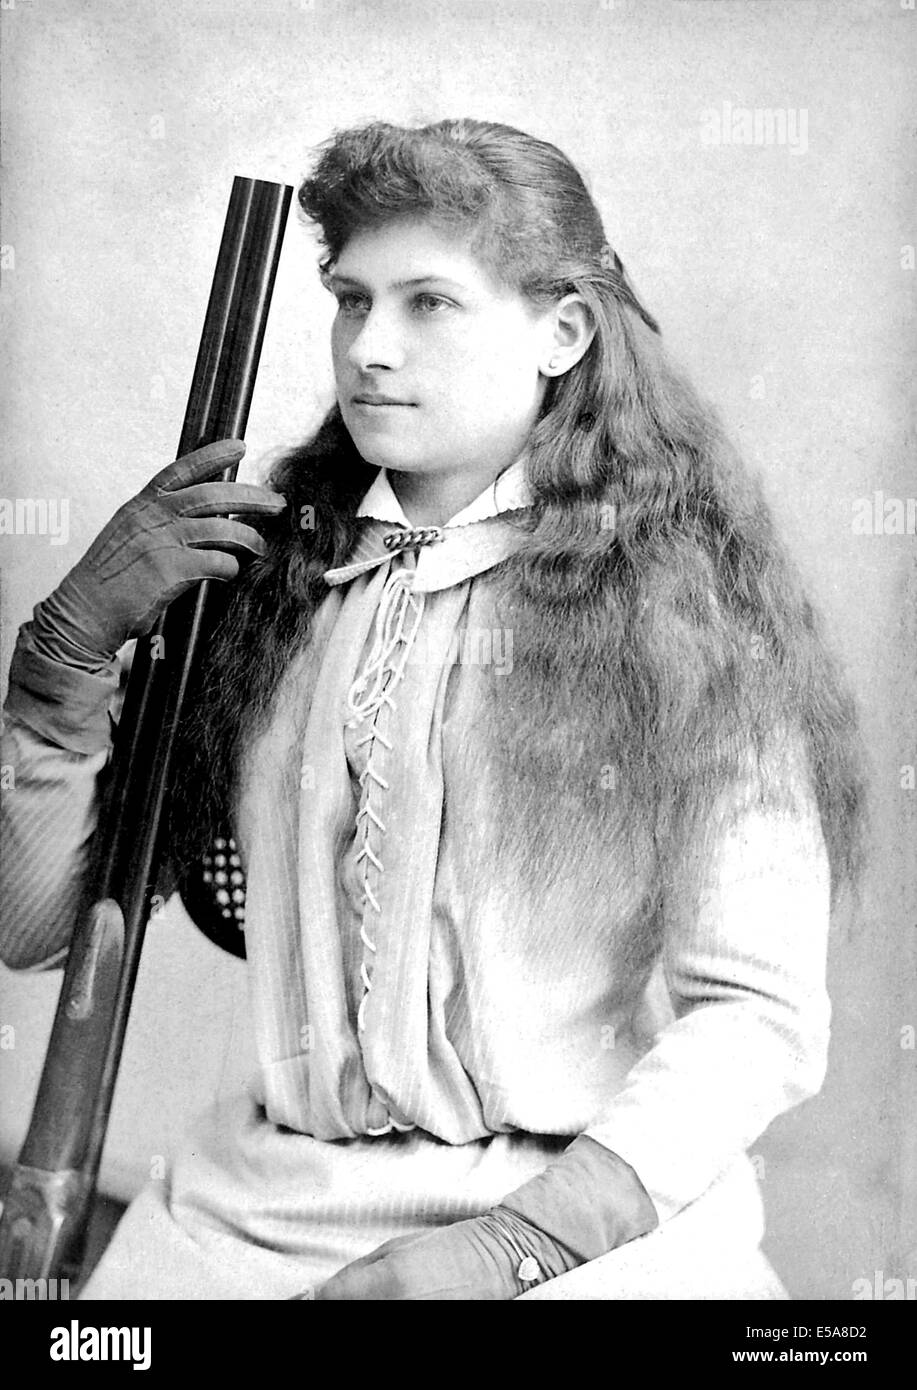 ANNIE OAKLEY (1860-1926) American sharpshooter and star of Buffalo Bill Cody's Wild West Show, here about 1880 Stock Photo